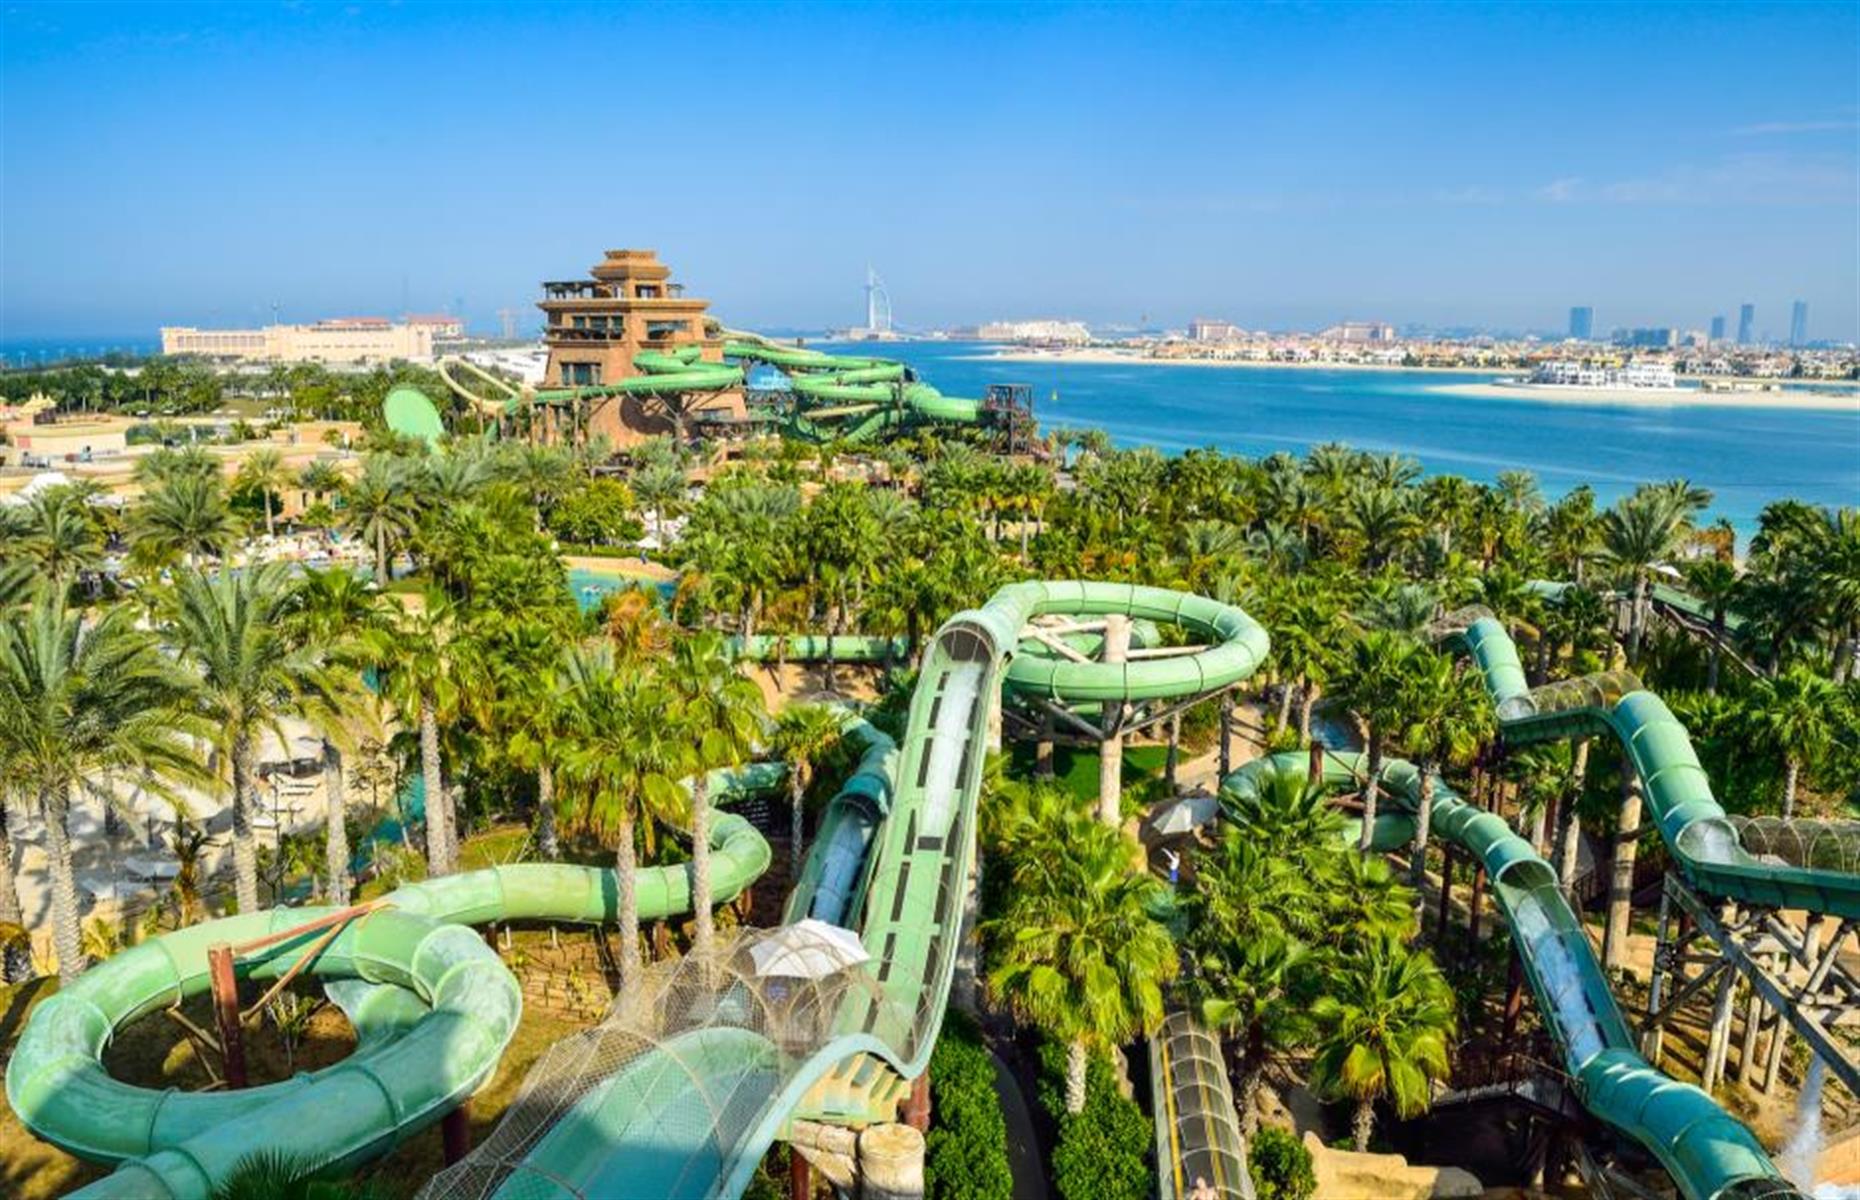 <p>It takes 45 minutes to ride the lazy river around <a href="https://www.atlantisthepalm.com/marine-water-park/aquaventure-waterpark">the Middle East's largest water park Aquaventure</a>, part of Atlantis, The Palm. The giant river connects the park's two main water slides – the Tower of Poseidon and Tower of Neptune. Up the ante on the Rapids where tube riders are propelled through high-intensity rapids, wave surges and waterfalls. The lovely tropical setting also includes a white-sand beach, perfect for flopping on.</p>  <p><a href="http://www.loveexploring.com/guides/78199/explore-dubai-what-to-see-top-hotels-and-the-best-restaurants"><strong>Before you head to Dubai, read our guide on what to see, top hotels and best restaurants</strong></a></p>